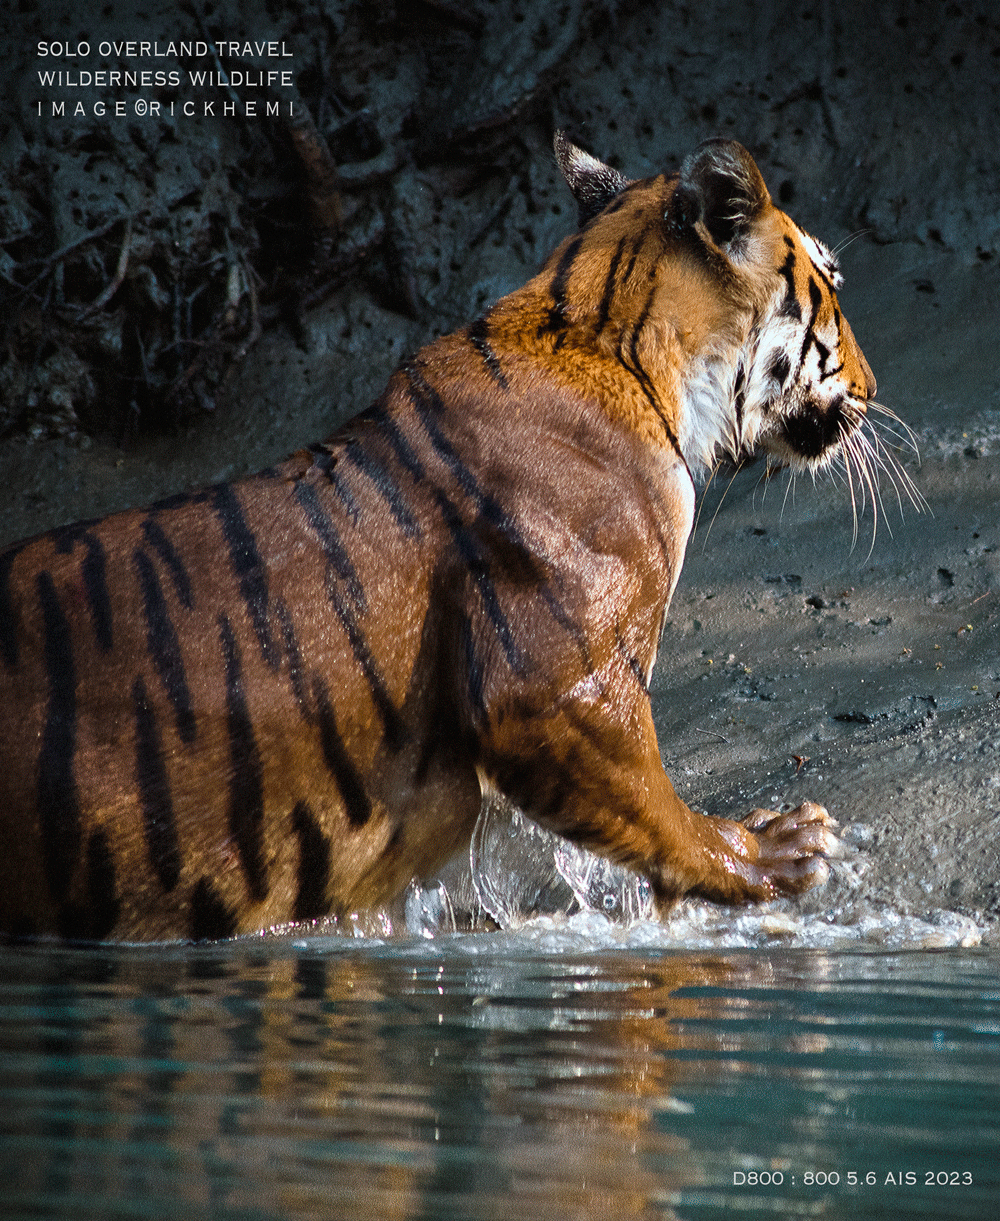 solo overland travel, wilderness swamp tiger image by Rick Hemi